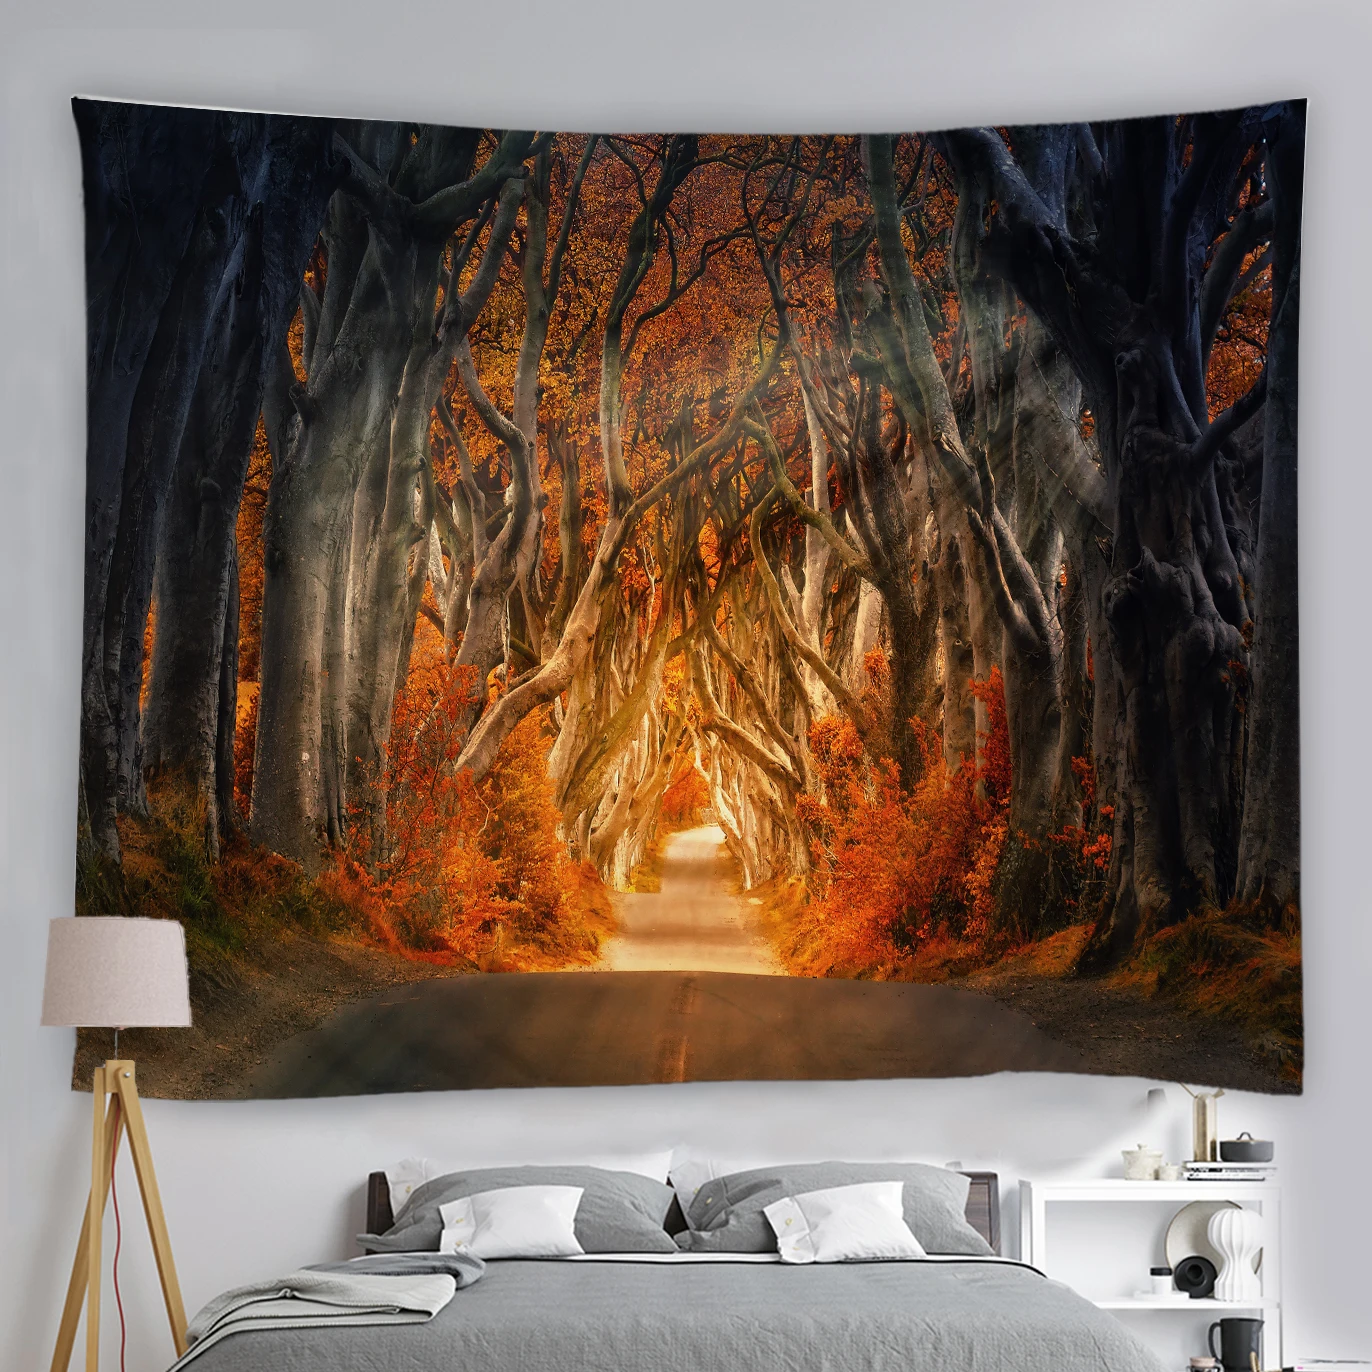 

Summer Tropical Forest Landscape Tapestry Wall Hanging Forest Path Nature Landscape Tapestries Aesthetic Room Decor Fabric Cloth